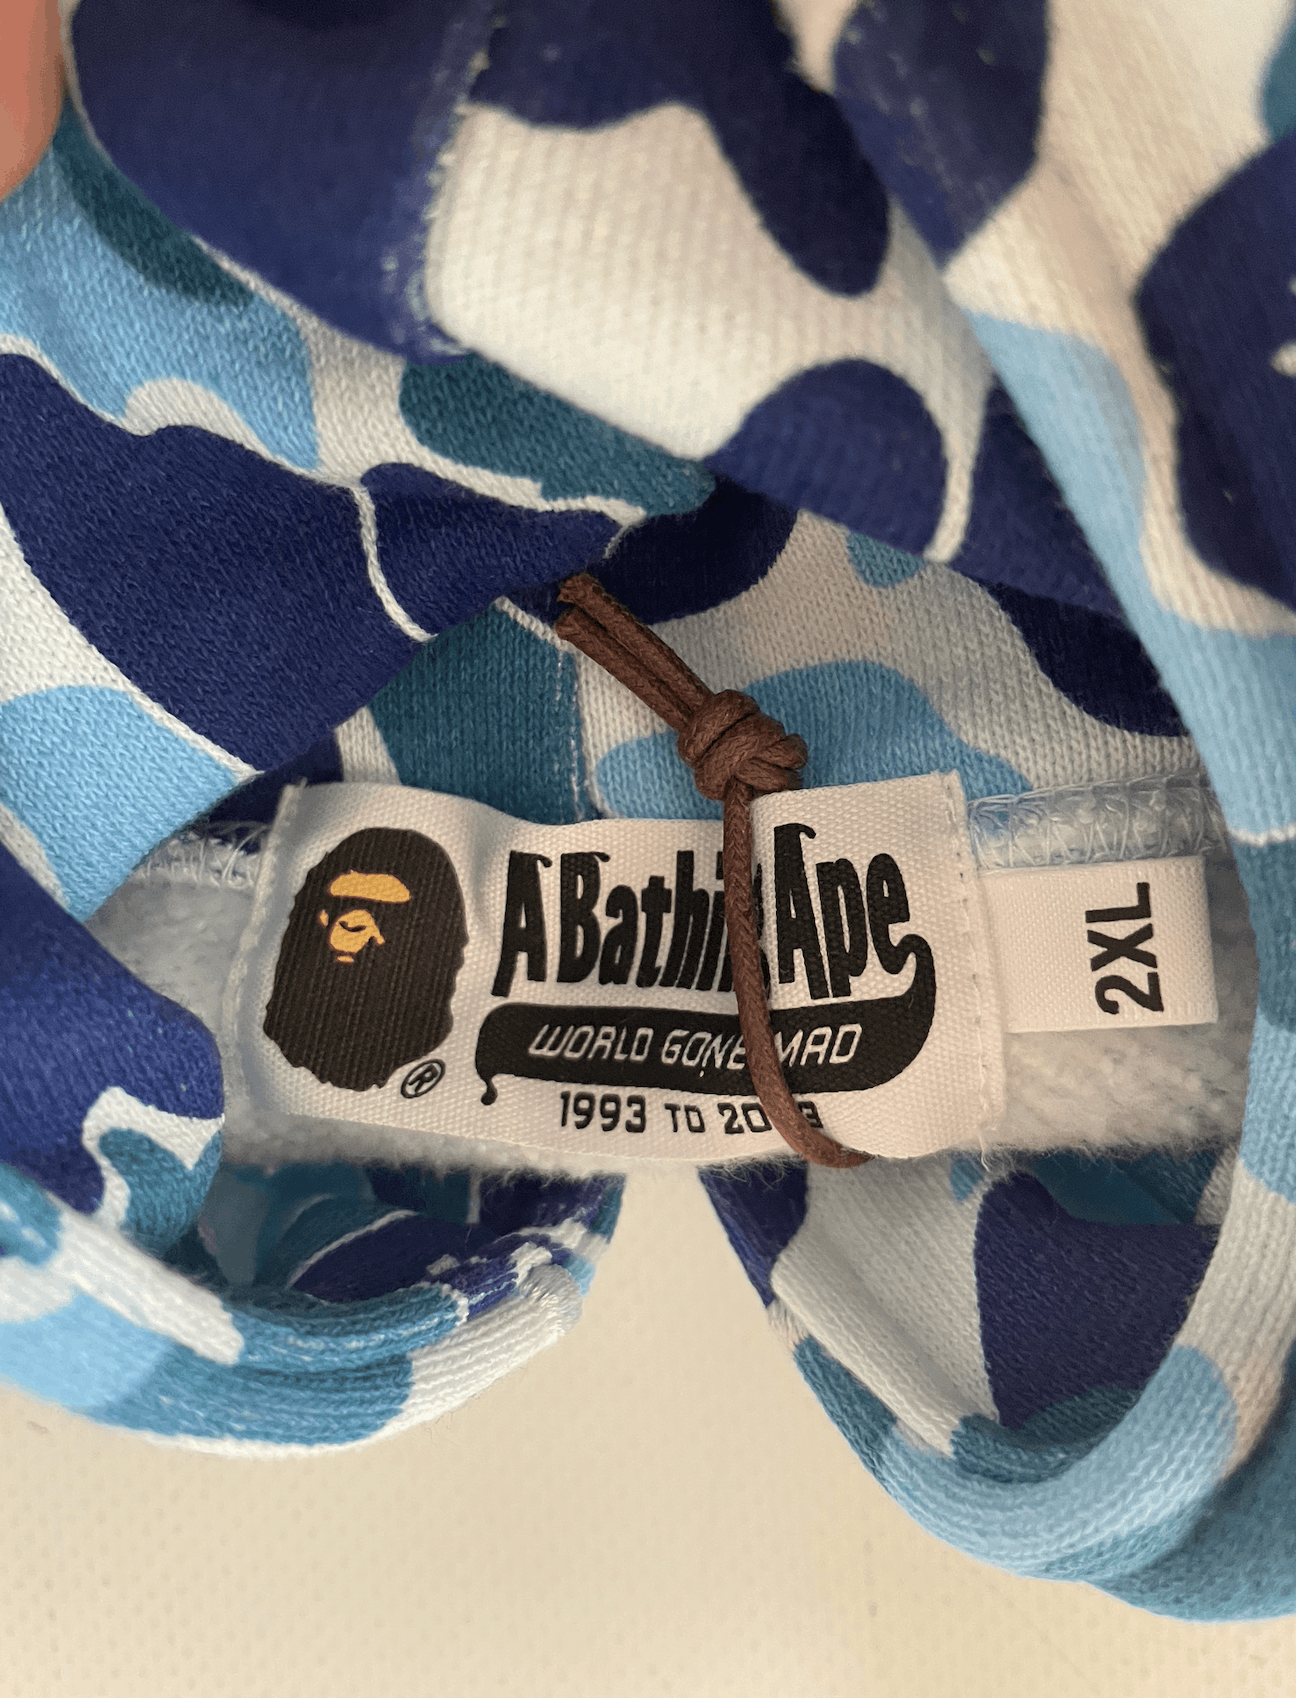 BAPE ABC Camo 2nd Ape Wide Fit Pullover Hoodie Green